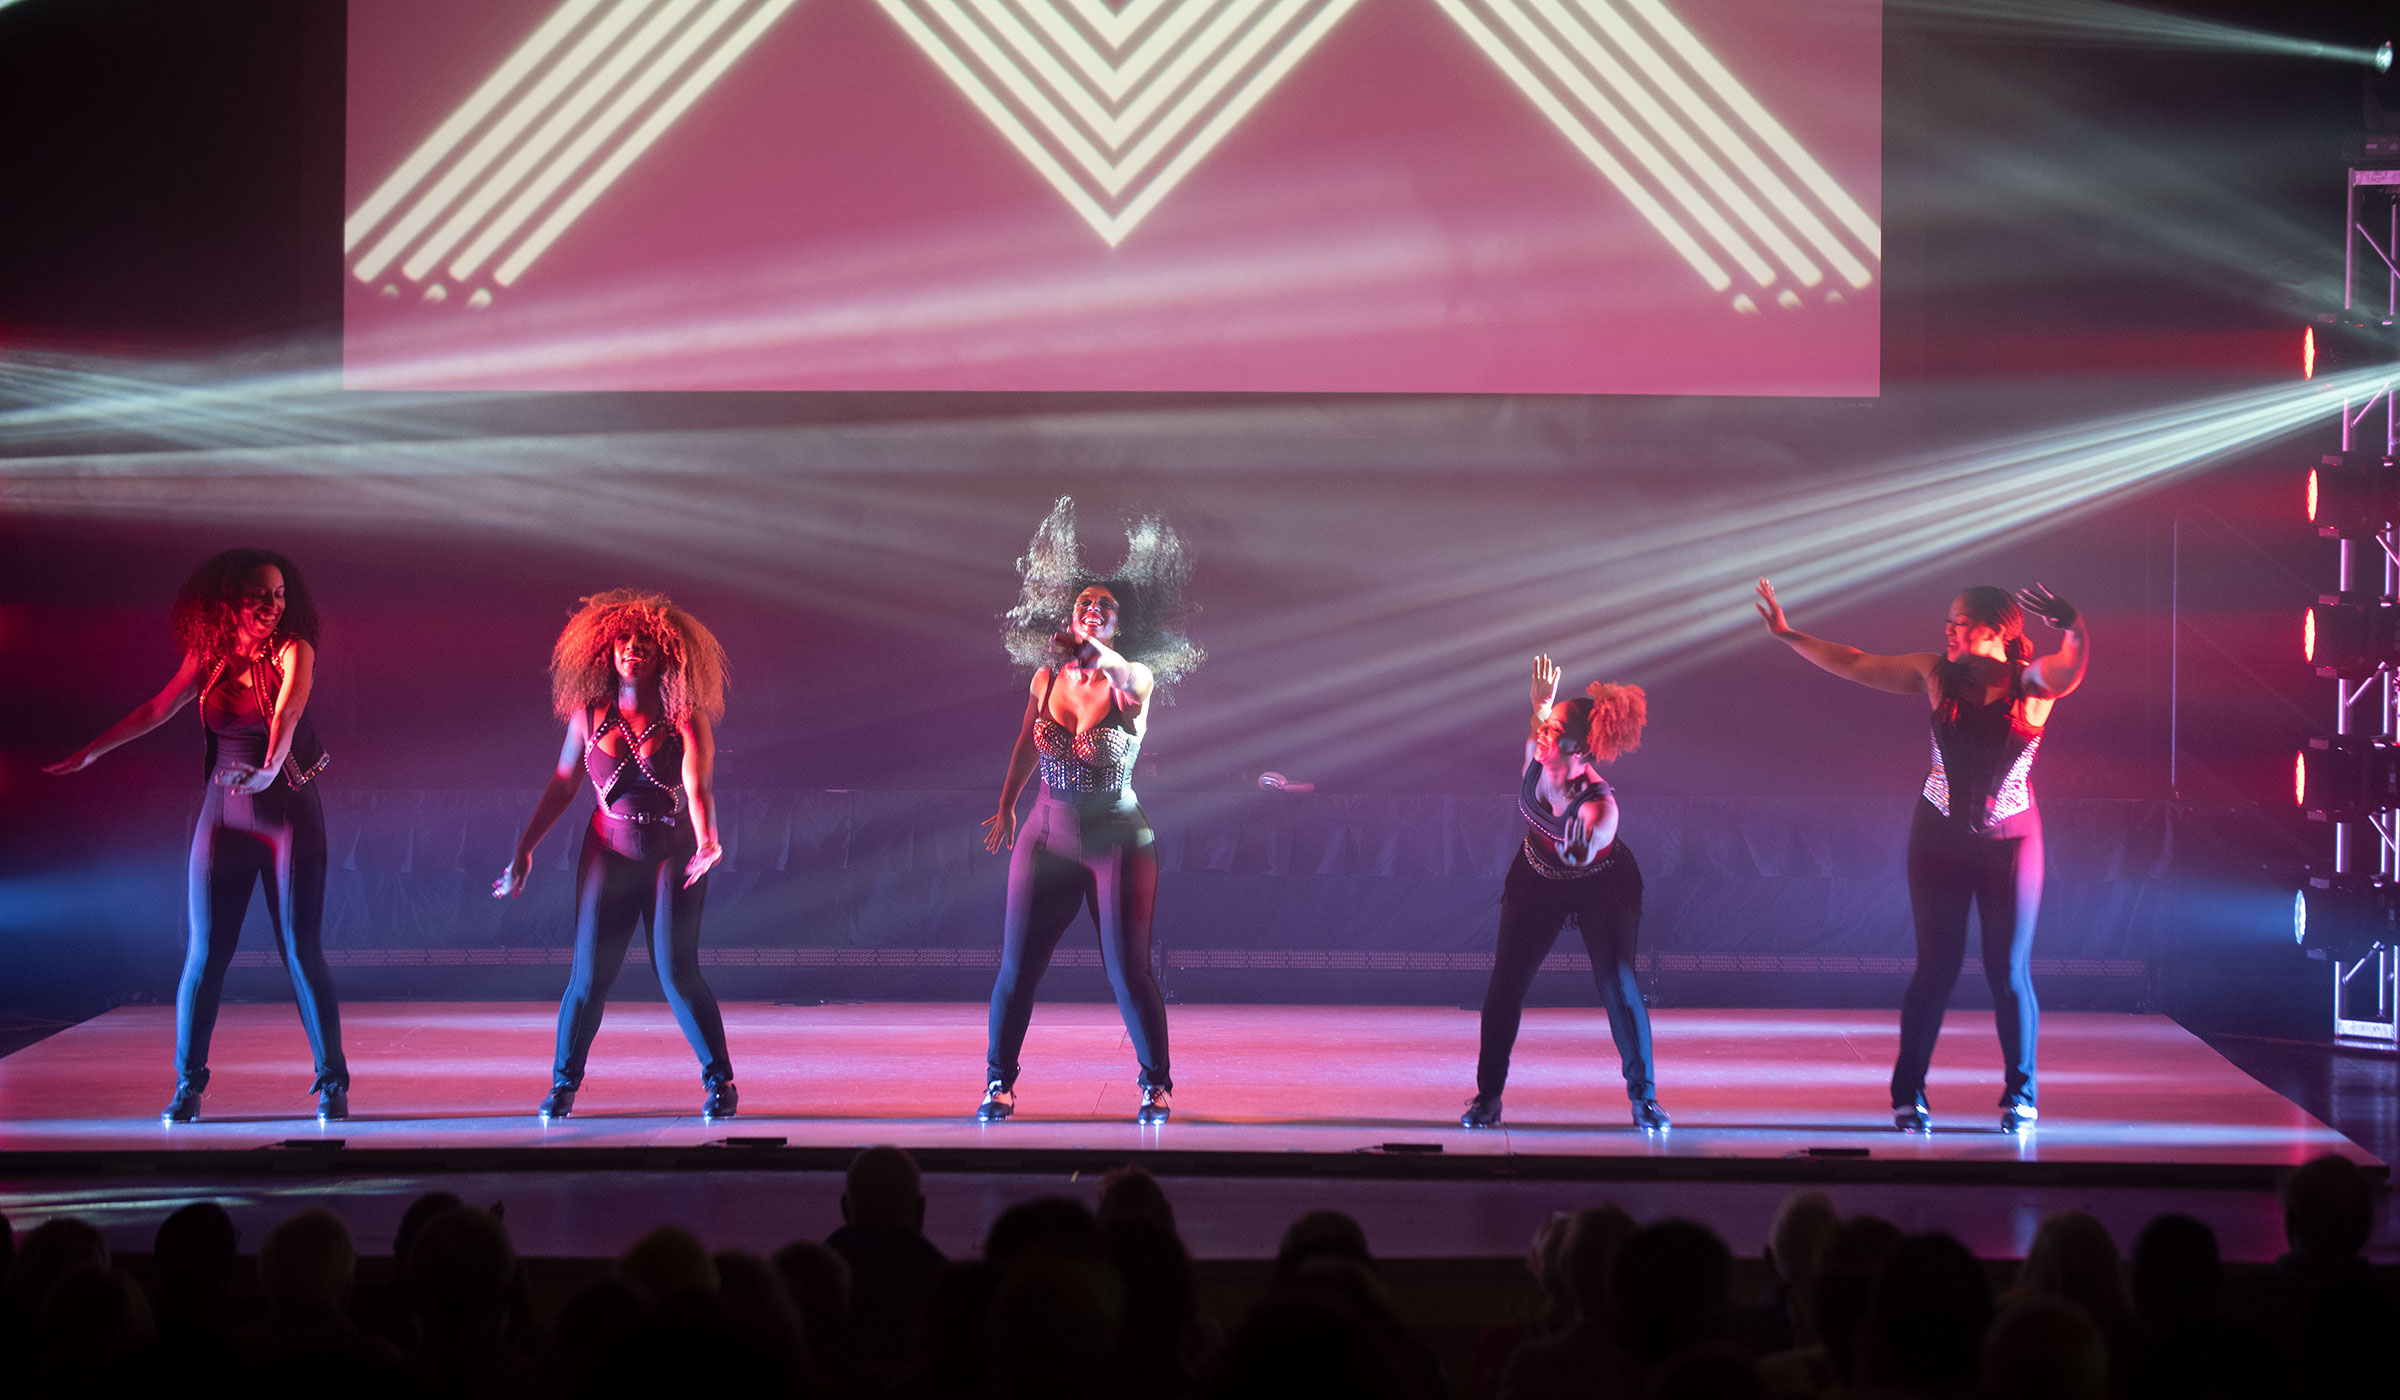 Ladies on stage with tap shoes dancing